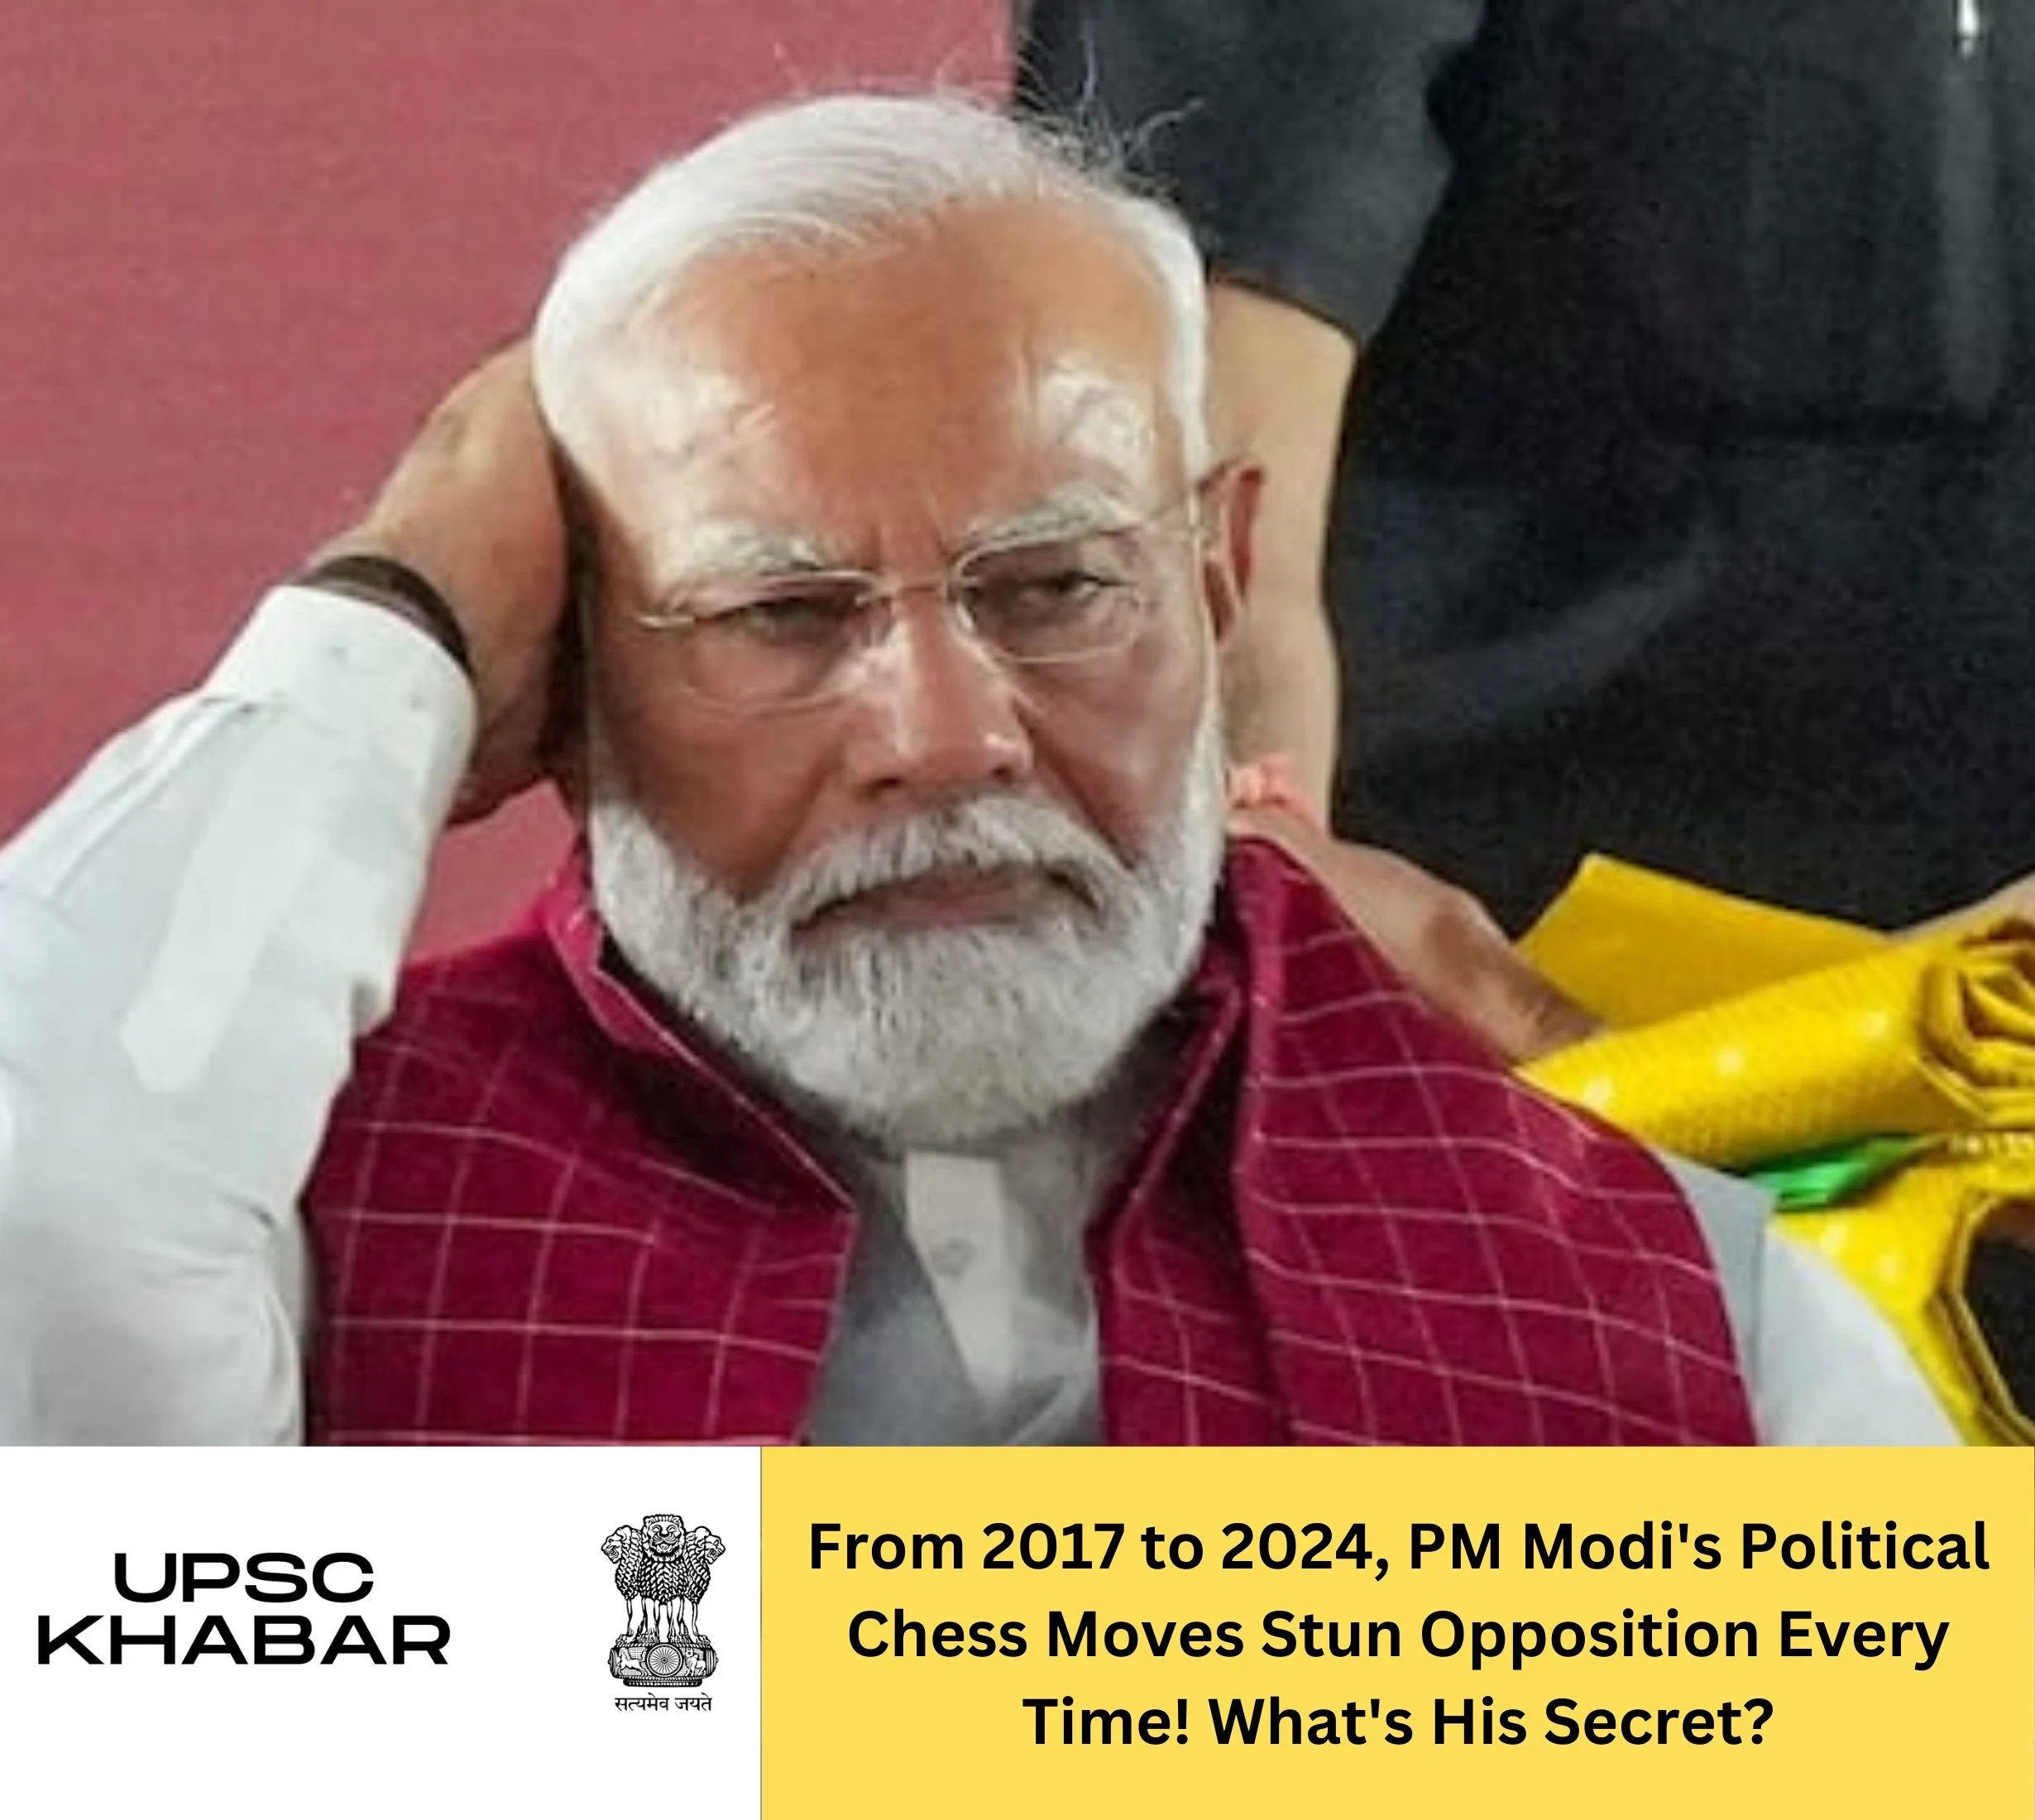 From 2017 to 2024, PM Modi's Political Chess Moves Stun Opposition Every Time! What's His Secret?